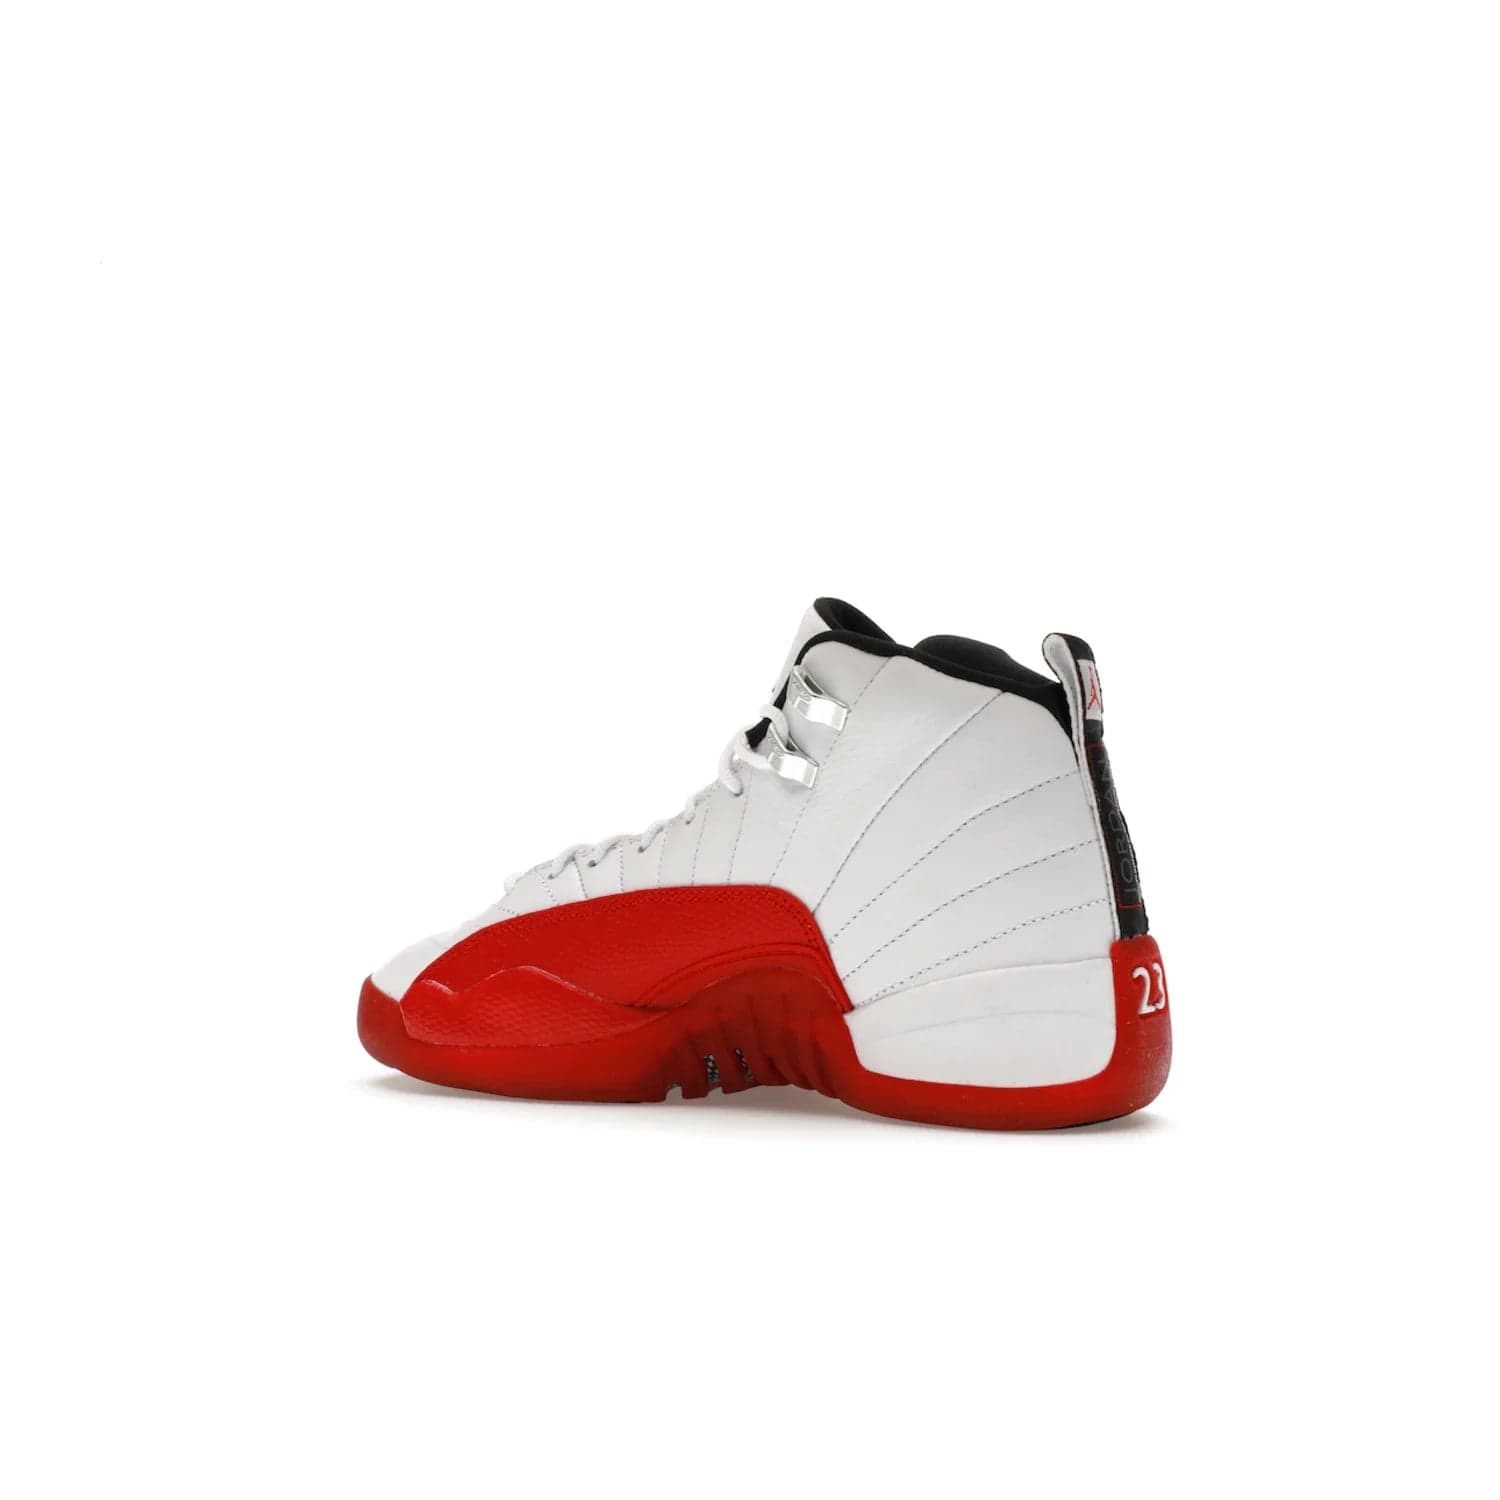 Jordan 12 Retro Cherry (2023) (GS) - Image 22 - Only at www.BallersClubKickz.com - Grab the Jordan 12 Retro Cherry (2023) (GS) and show off your signature style with these iconic kicks. Dressed in White, Black and Varsity Red, these timeless kicks are sure to turn heads. Available October 28, 2023.